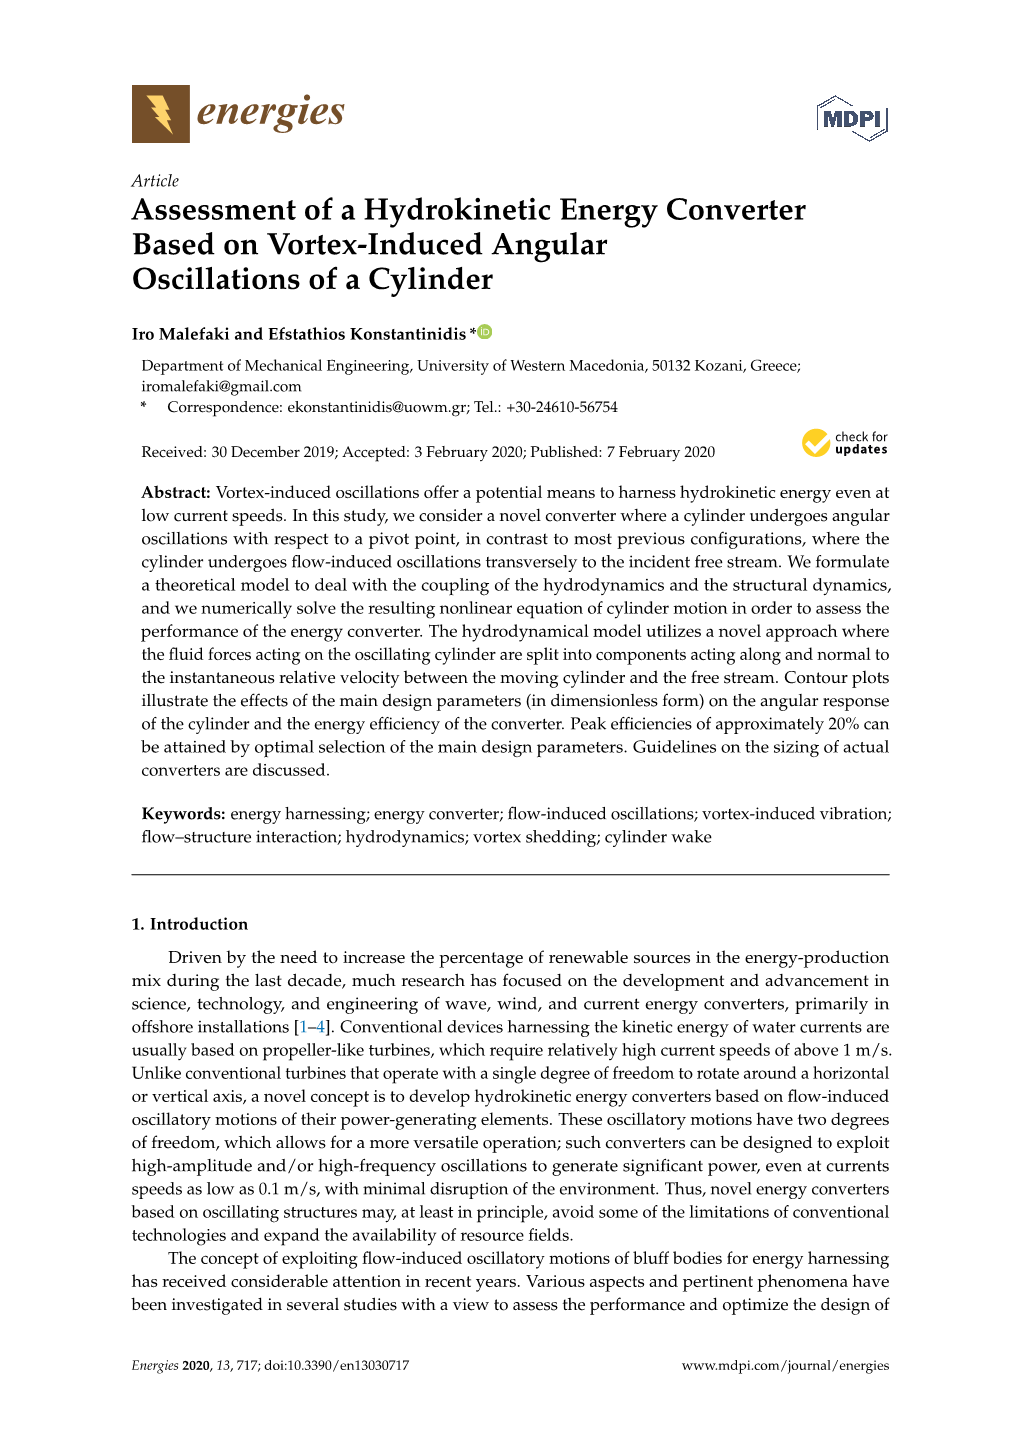 Assessment of a Hydrokinetic Energy Converter Based on Vortex-Induced Angular Oscillations of a Cylinder